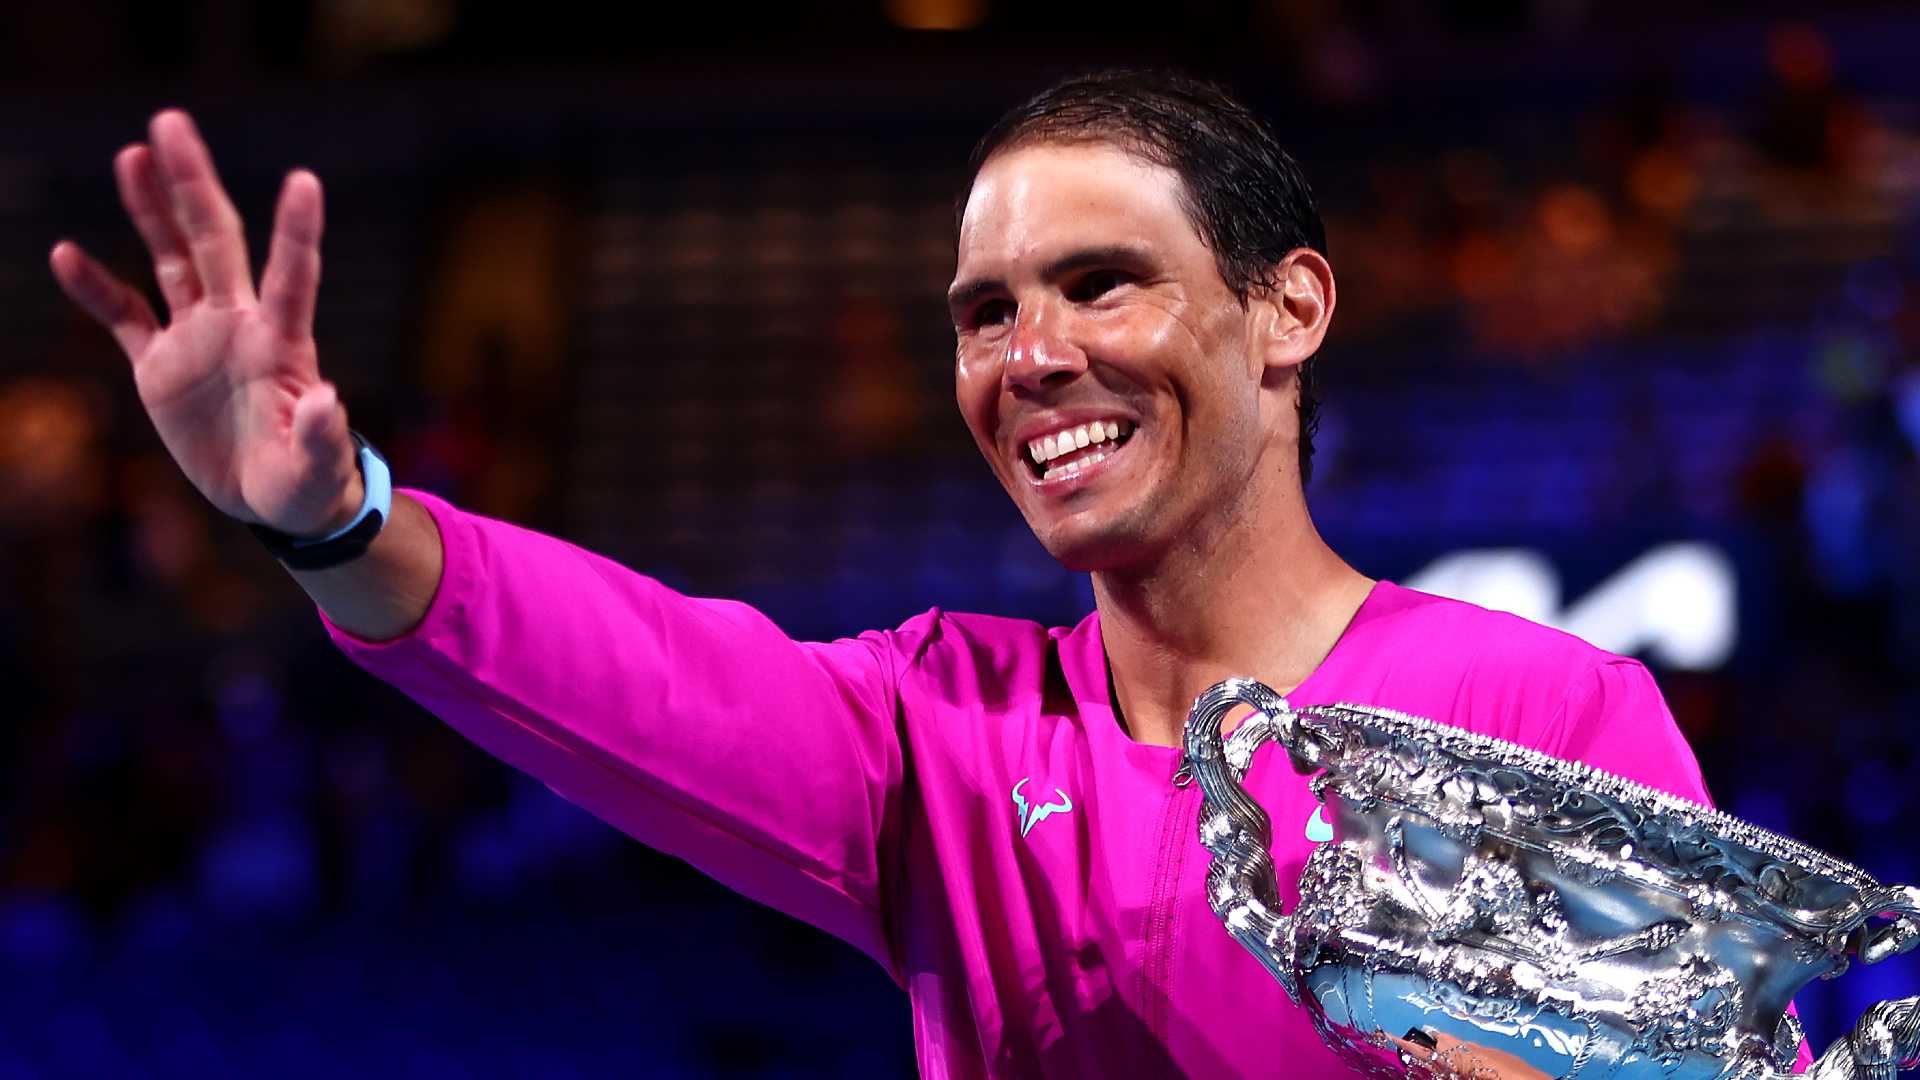 Two-time Australian Open champion Rafael Nadal returns to defend his 2022 crown.